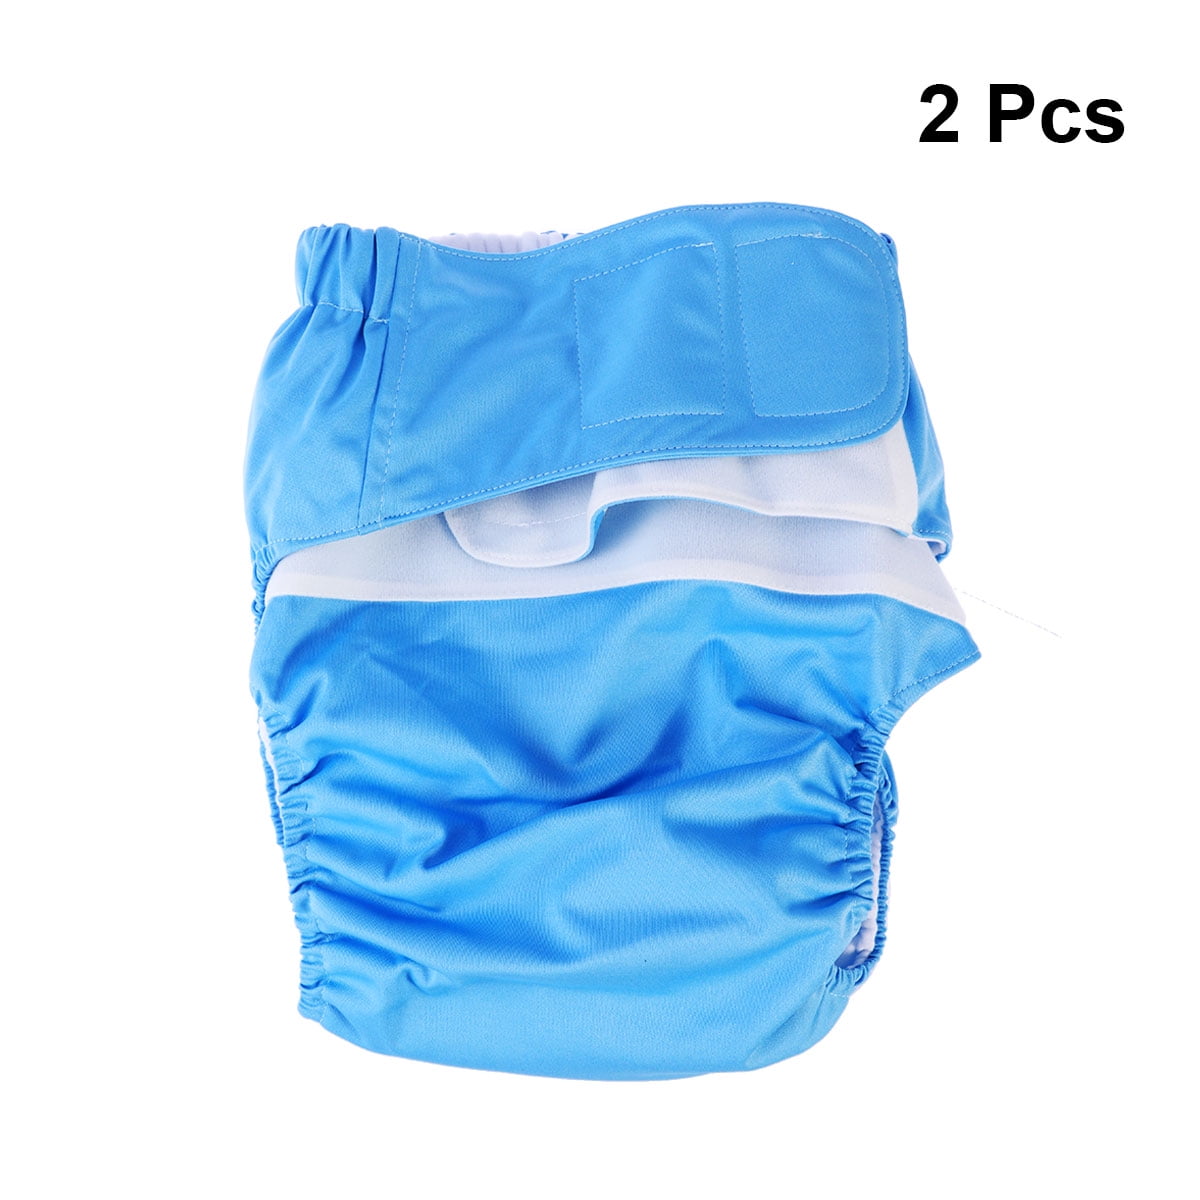 Free Shipping Fuubuu2211-ttransparent-xxl-1 Open Front Waterproof Pants  Adult Non Disposable Incontinence Plastic Pants Diaper - Adult Diapers -  AliExpress